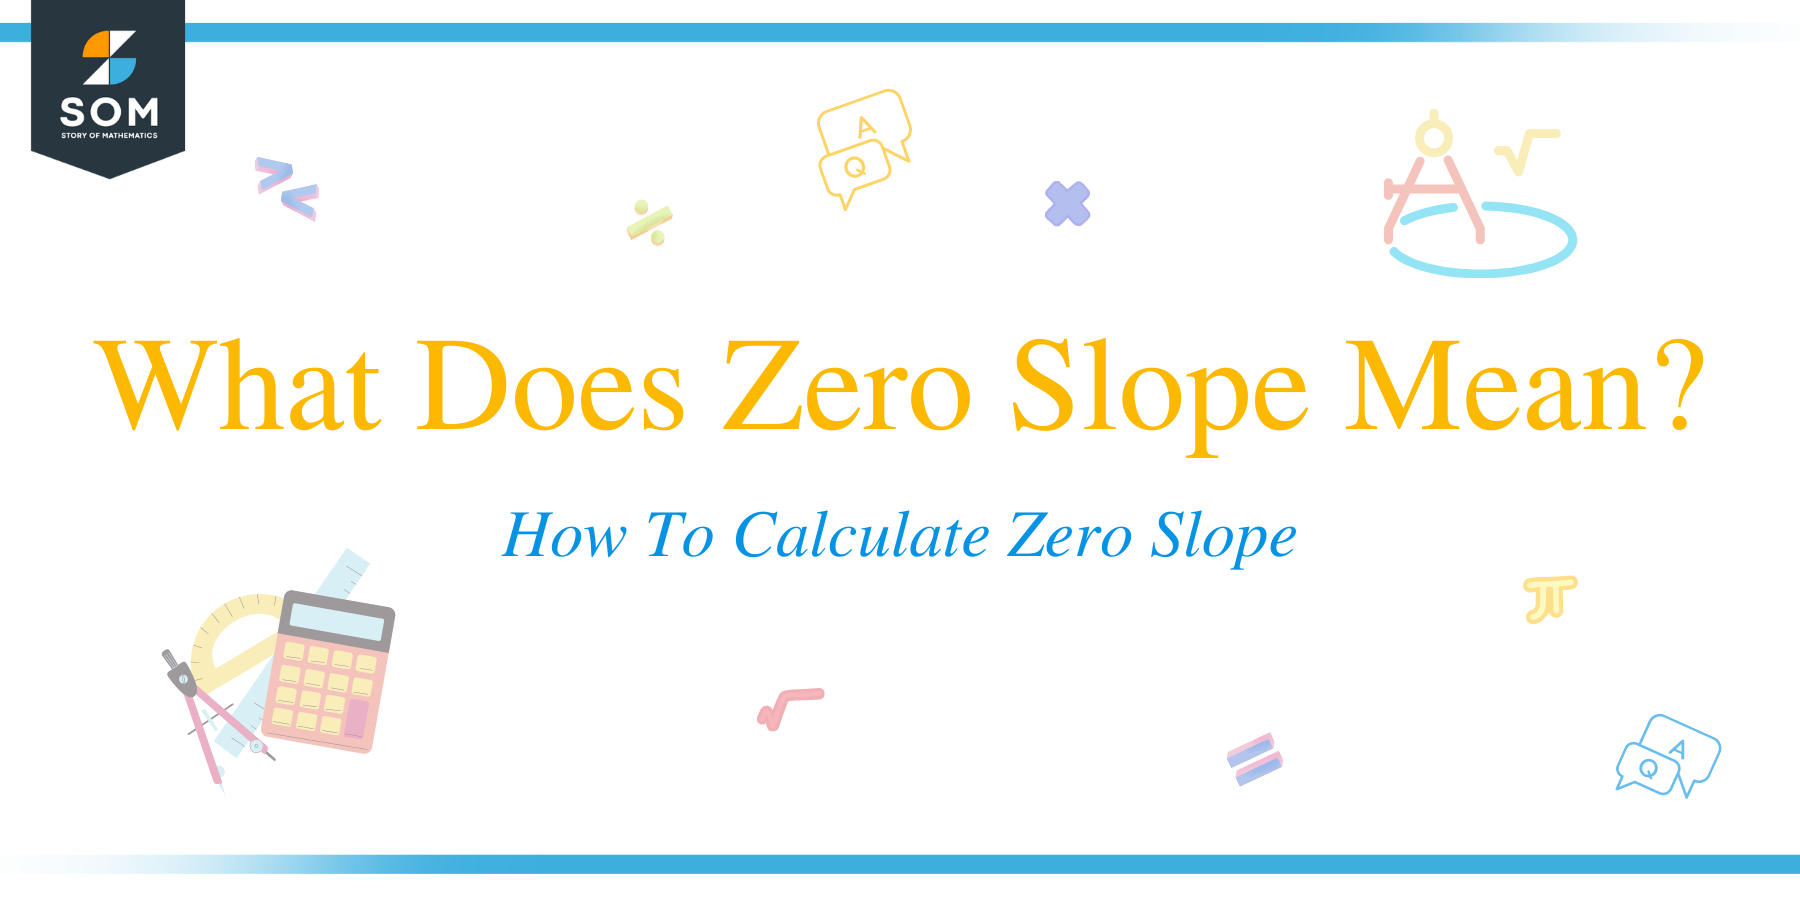 What Does Zero Slope Mean?